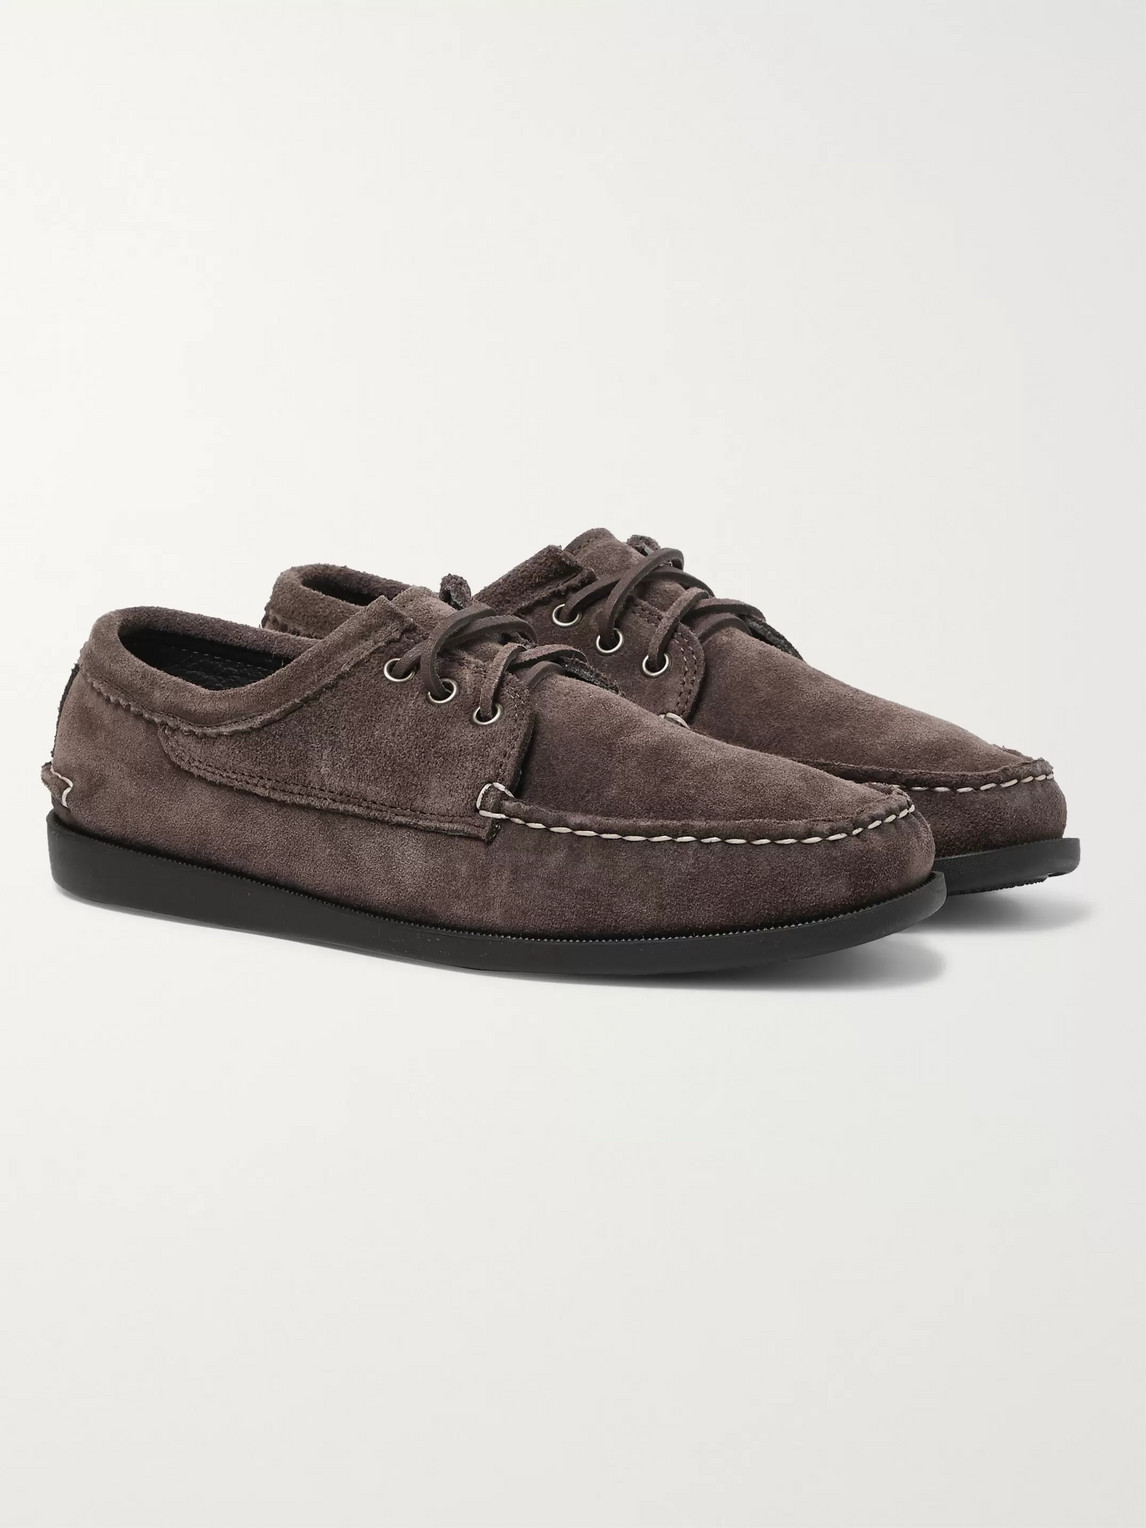 Quoddy Blucher Suede Boat Shoes In Brown